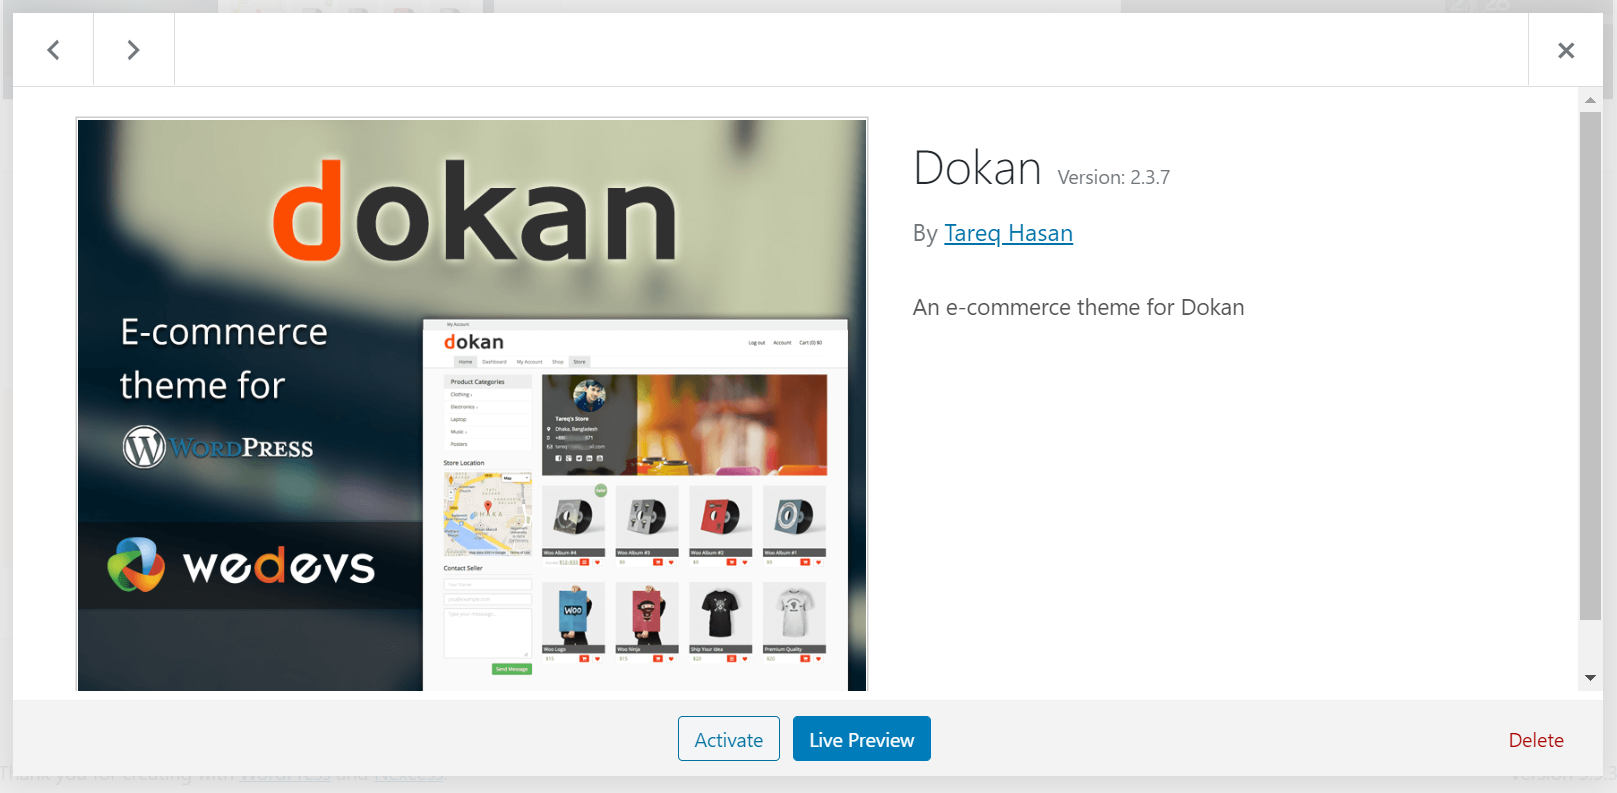 The Dokan theme activate and preview screen.